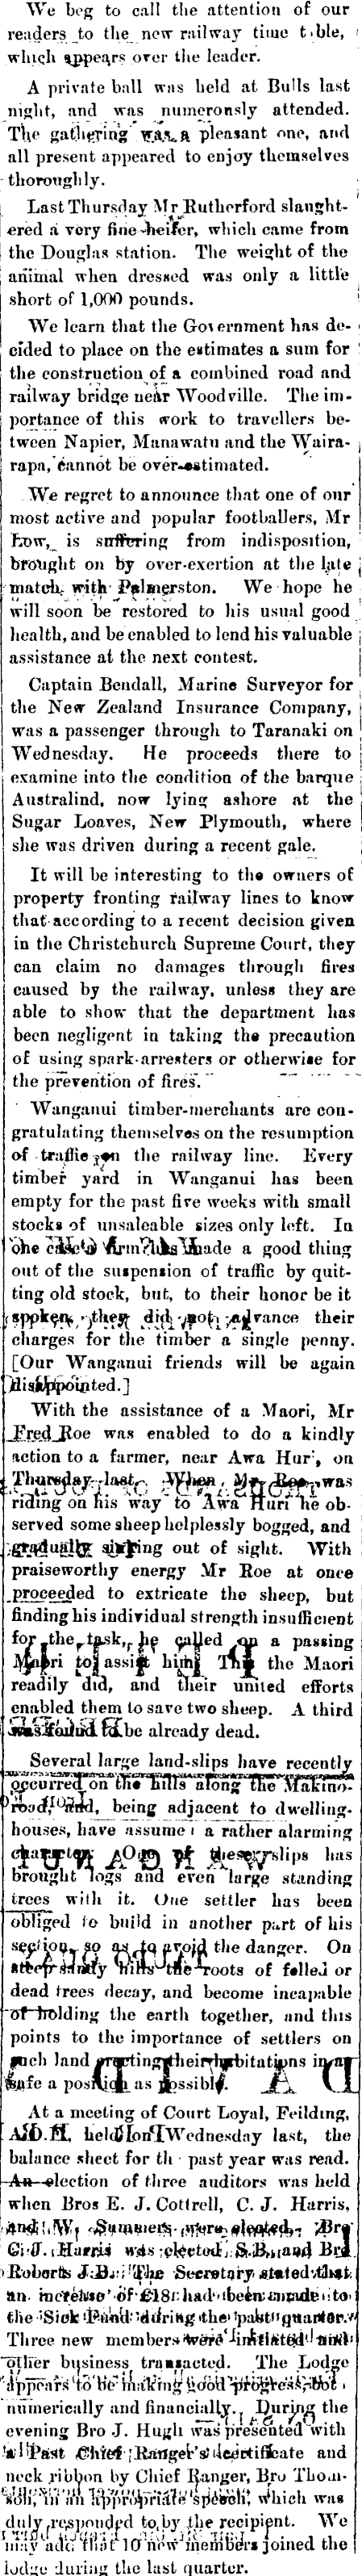 Papers Past, Newspapers, Feilding Star, 22 July 1882